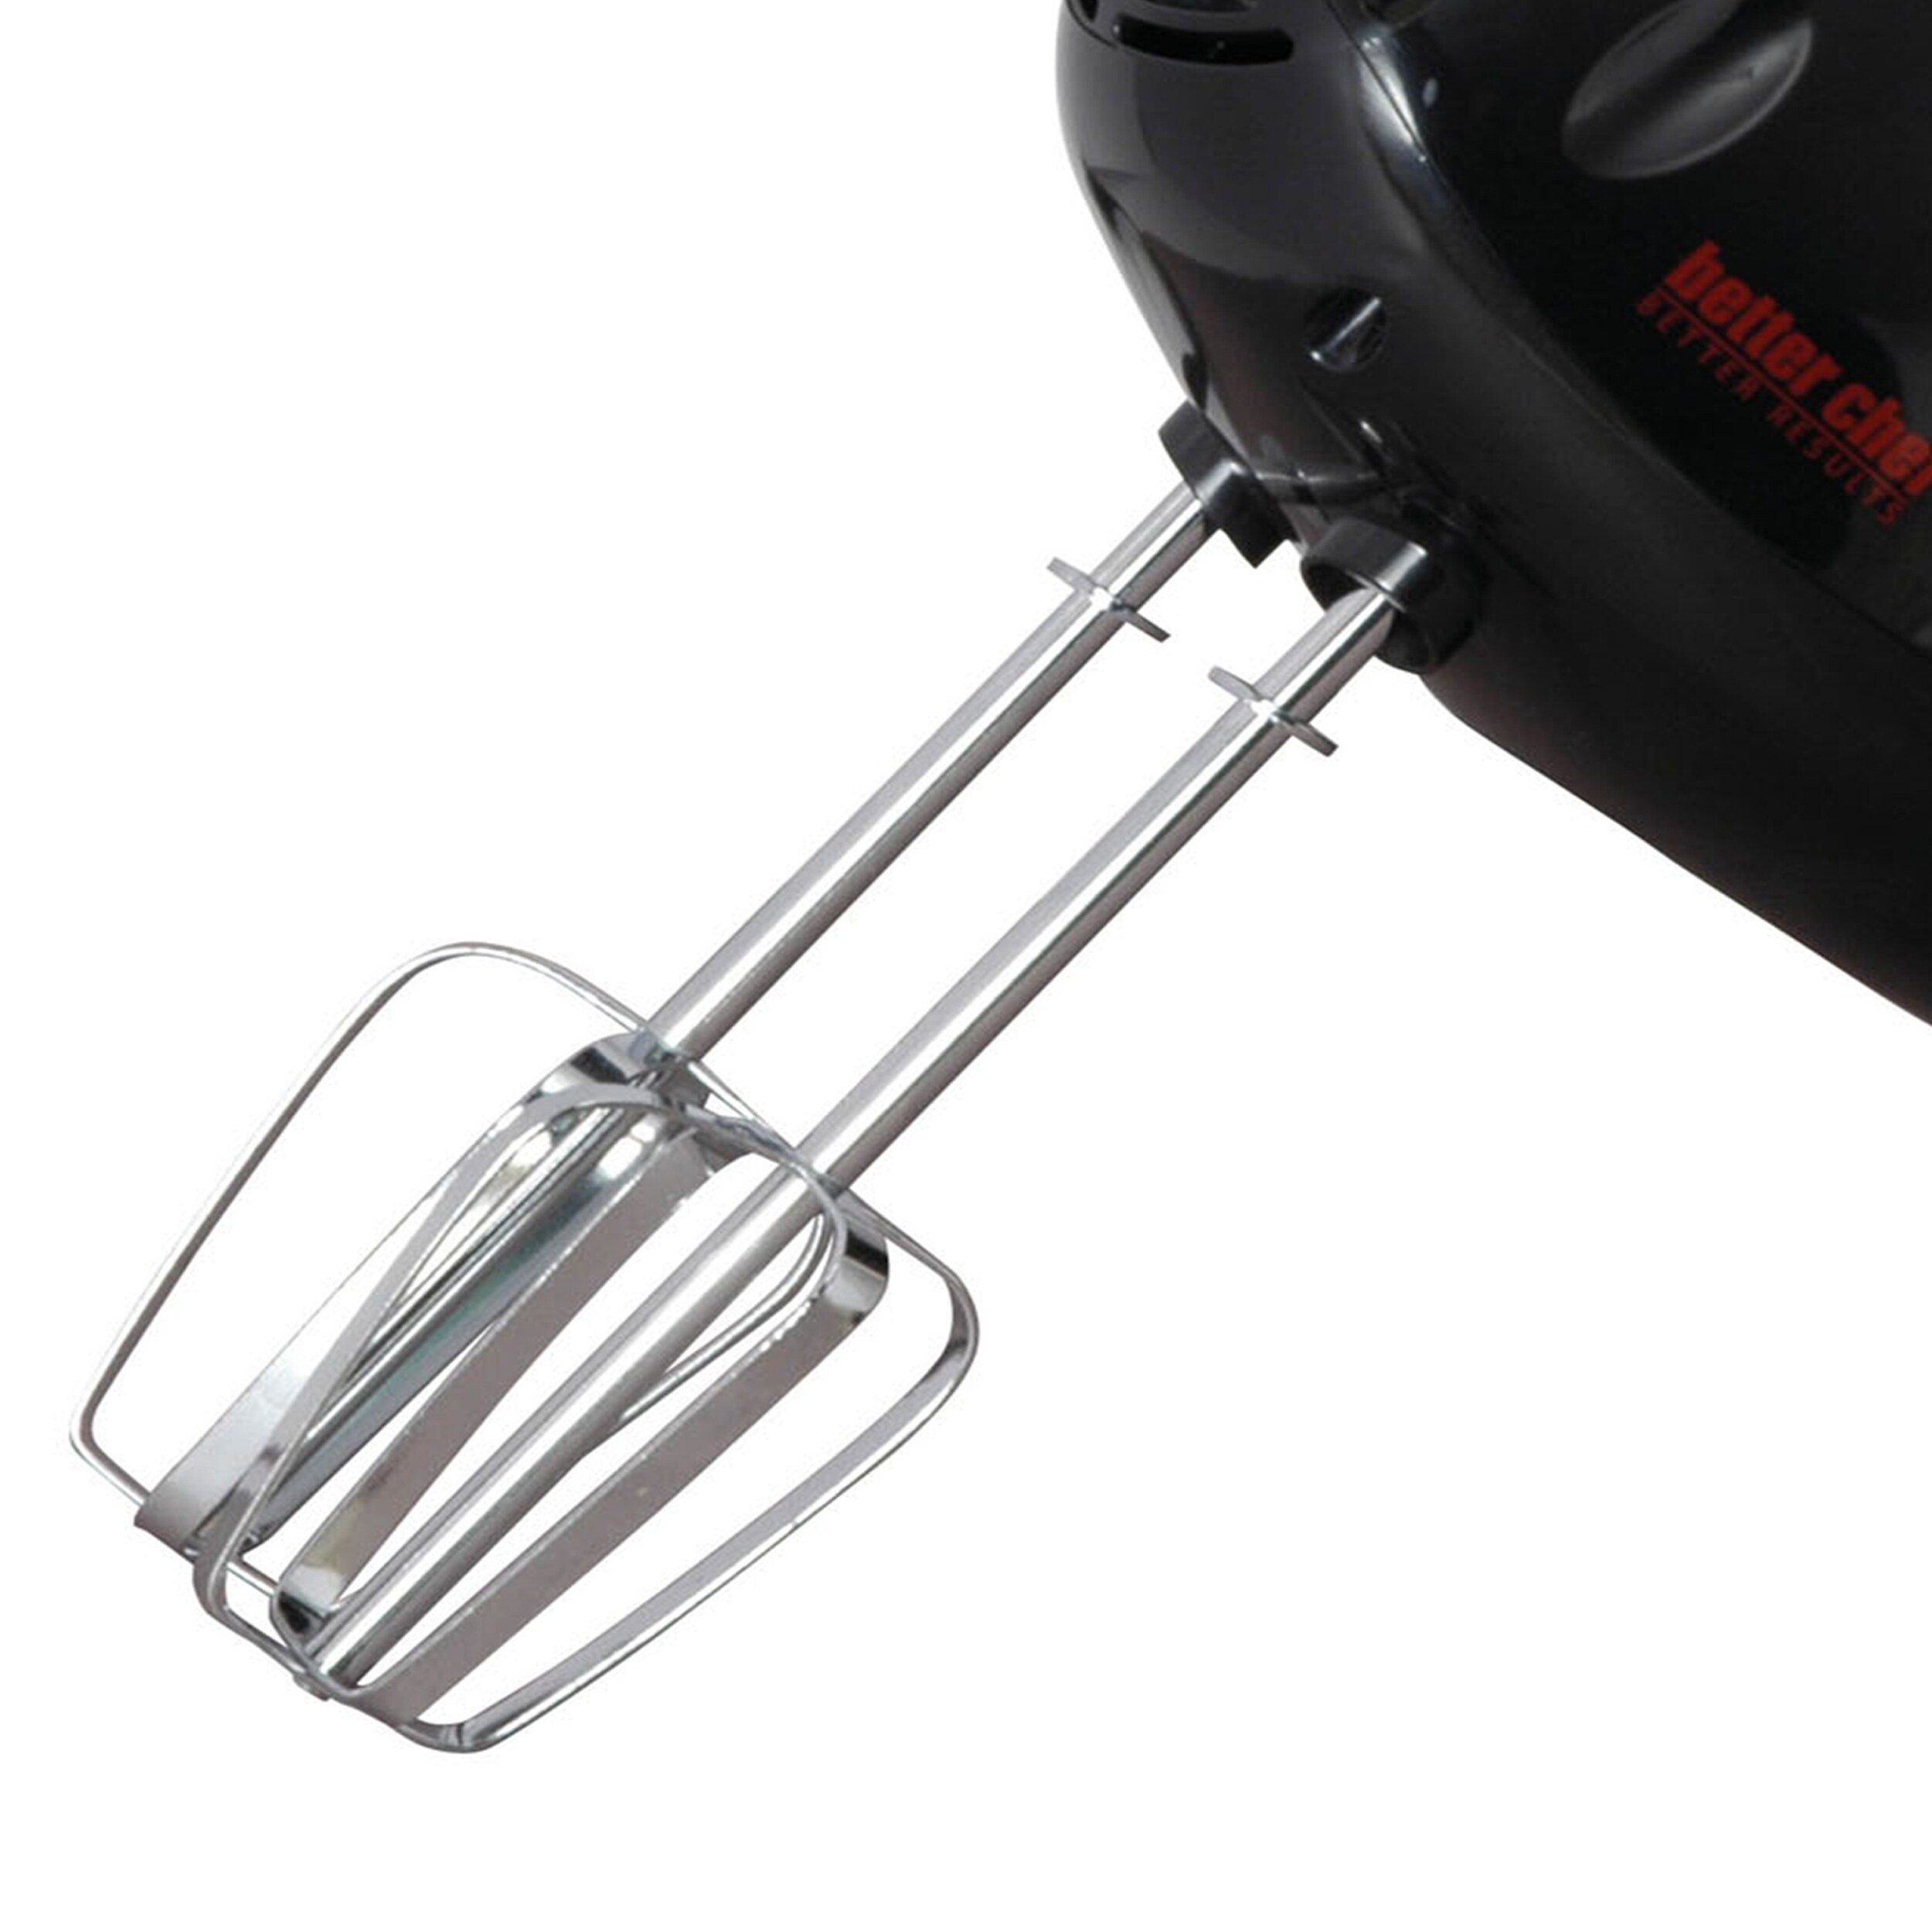 Better Chef 6-in Cord 2-Speed Red Hand Mixer in the Hand Mixers